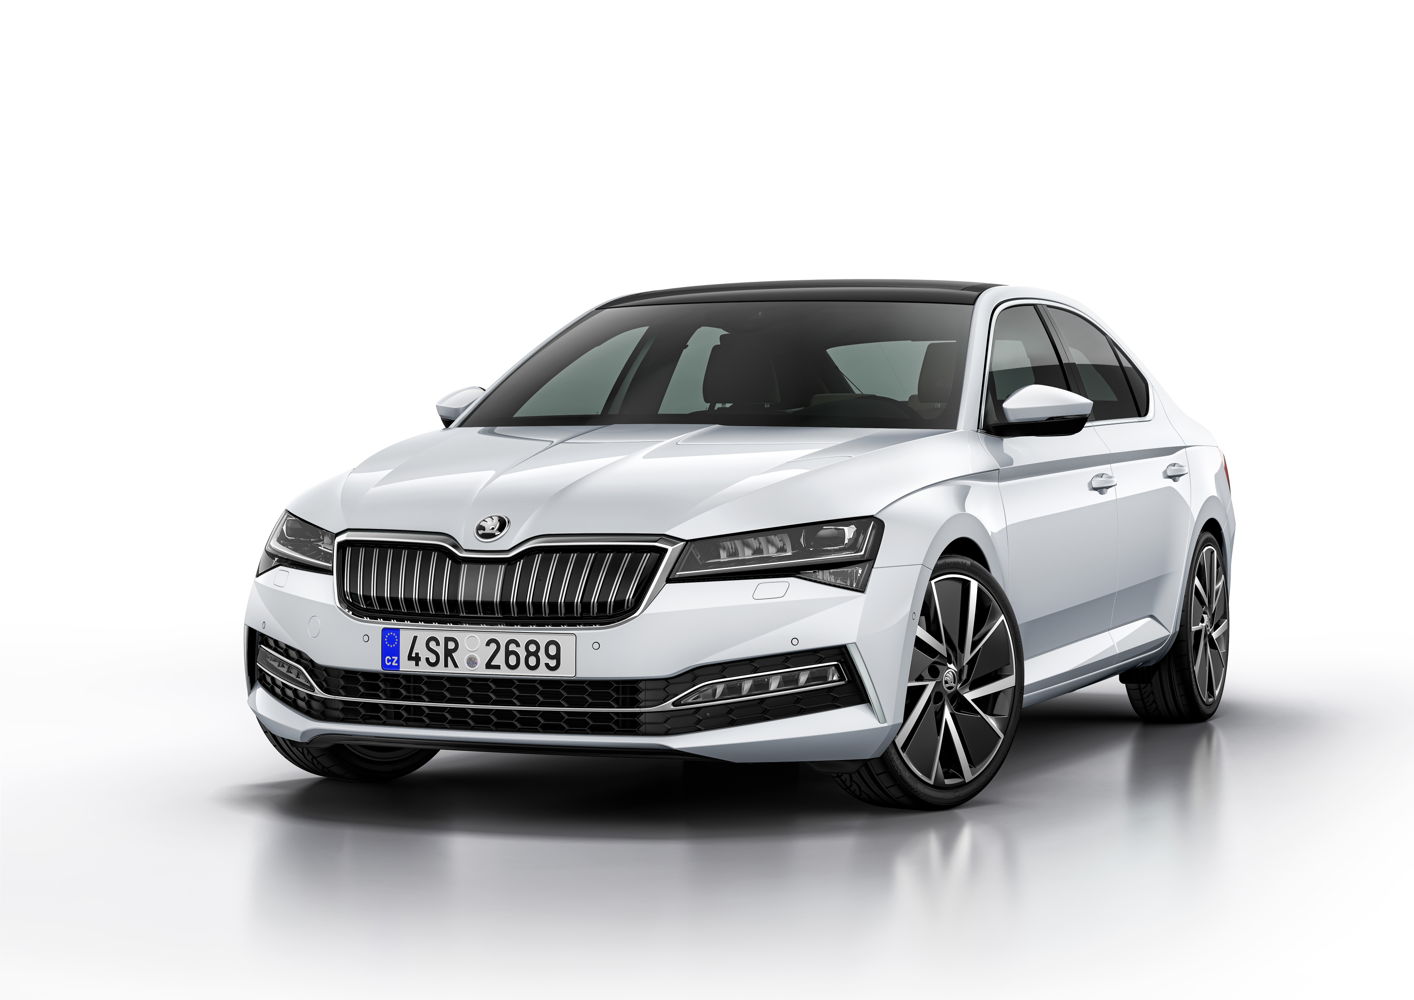 In the SUPERB iV, a 1.4 TSI petrol engine and an electric
motor deliver a combined power output of 160 kW (218 PS).